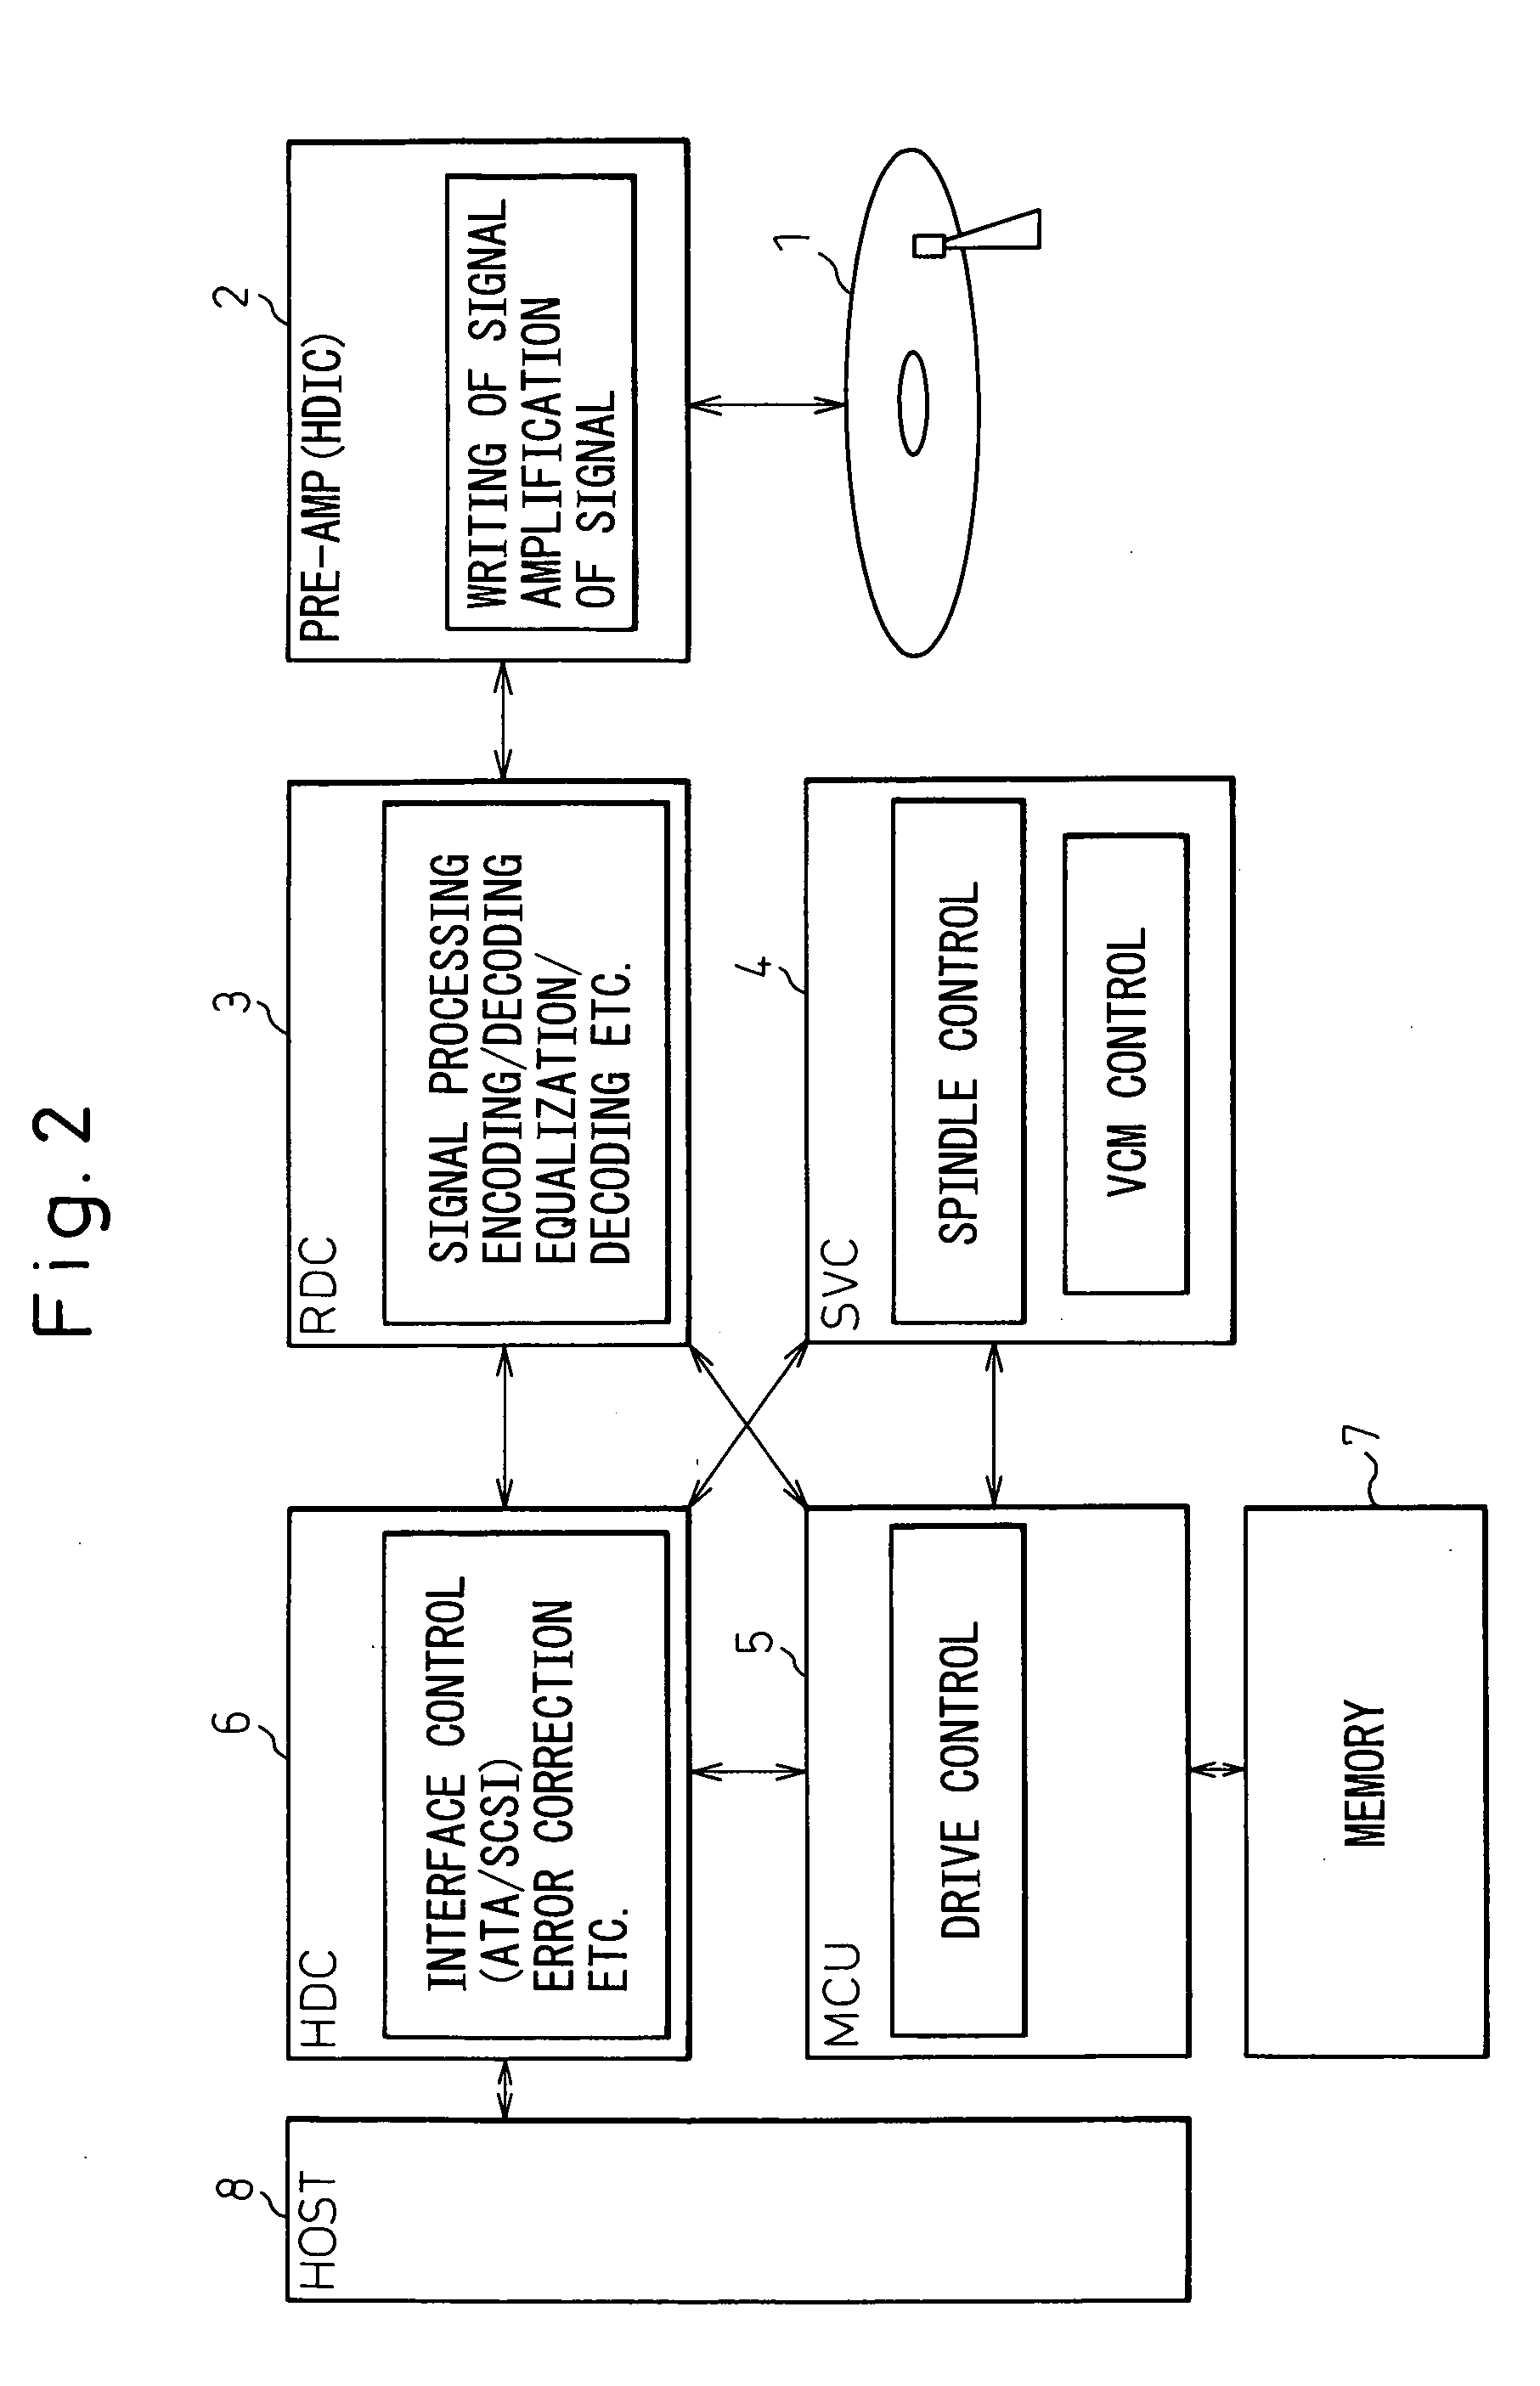 Method of protection of information of depopulated magnetic disk apparatus